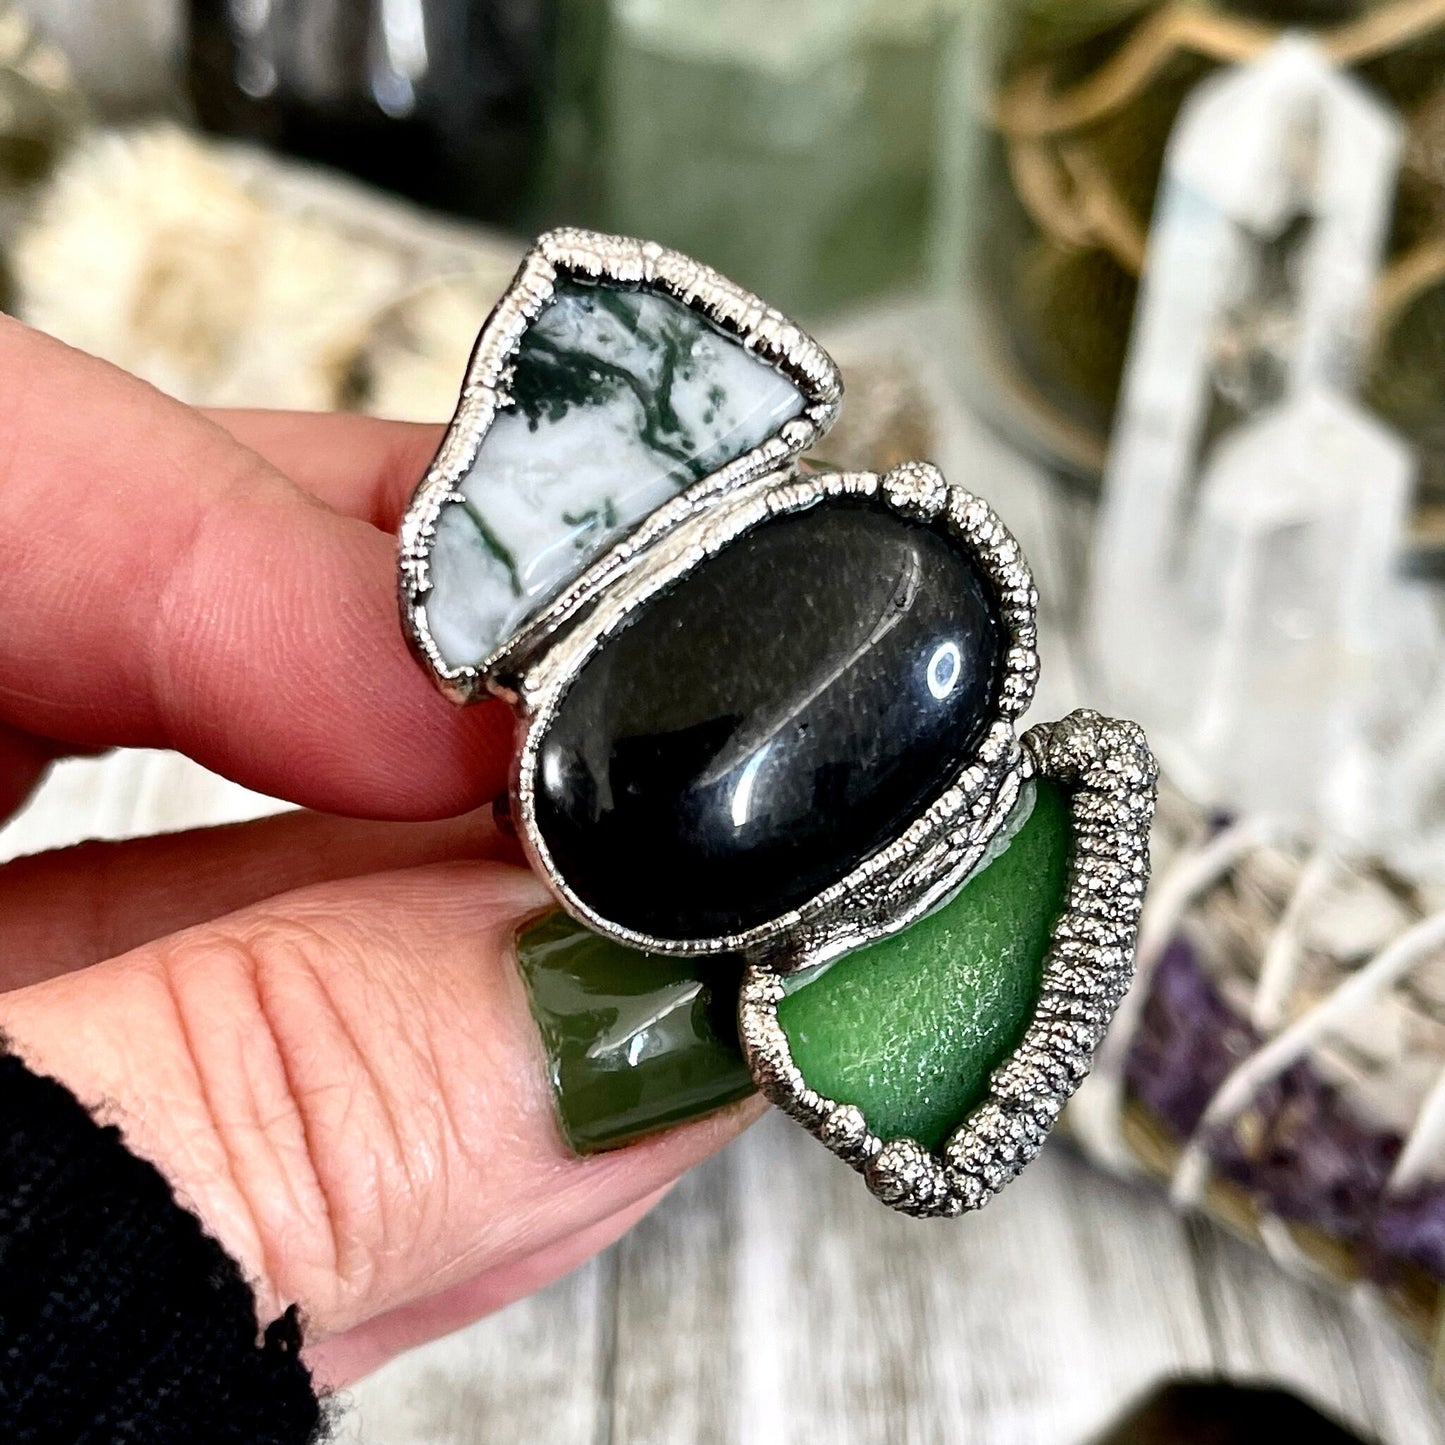 Size 8 Crystal Ring - Three Stone Black Onyx Sea Glass Moss Agate Ring Sliver / Foxlark Collection - One of a Kind / Crystal Jewelry